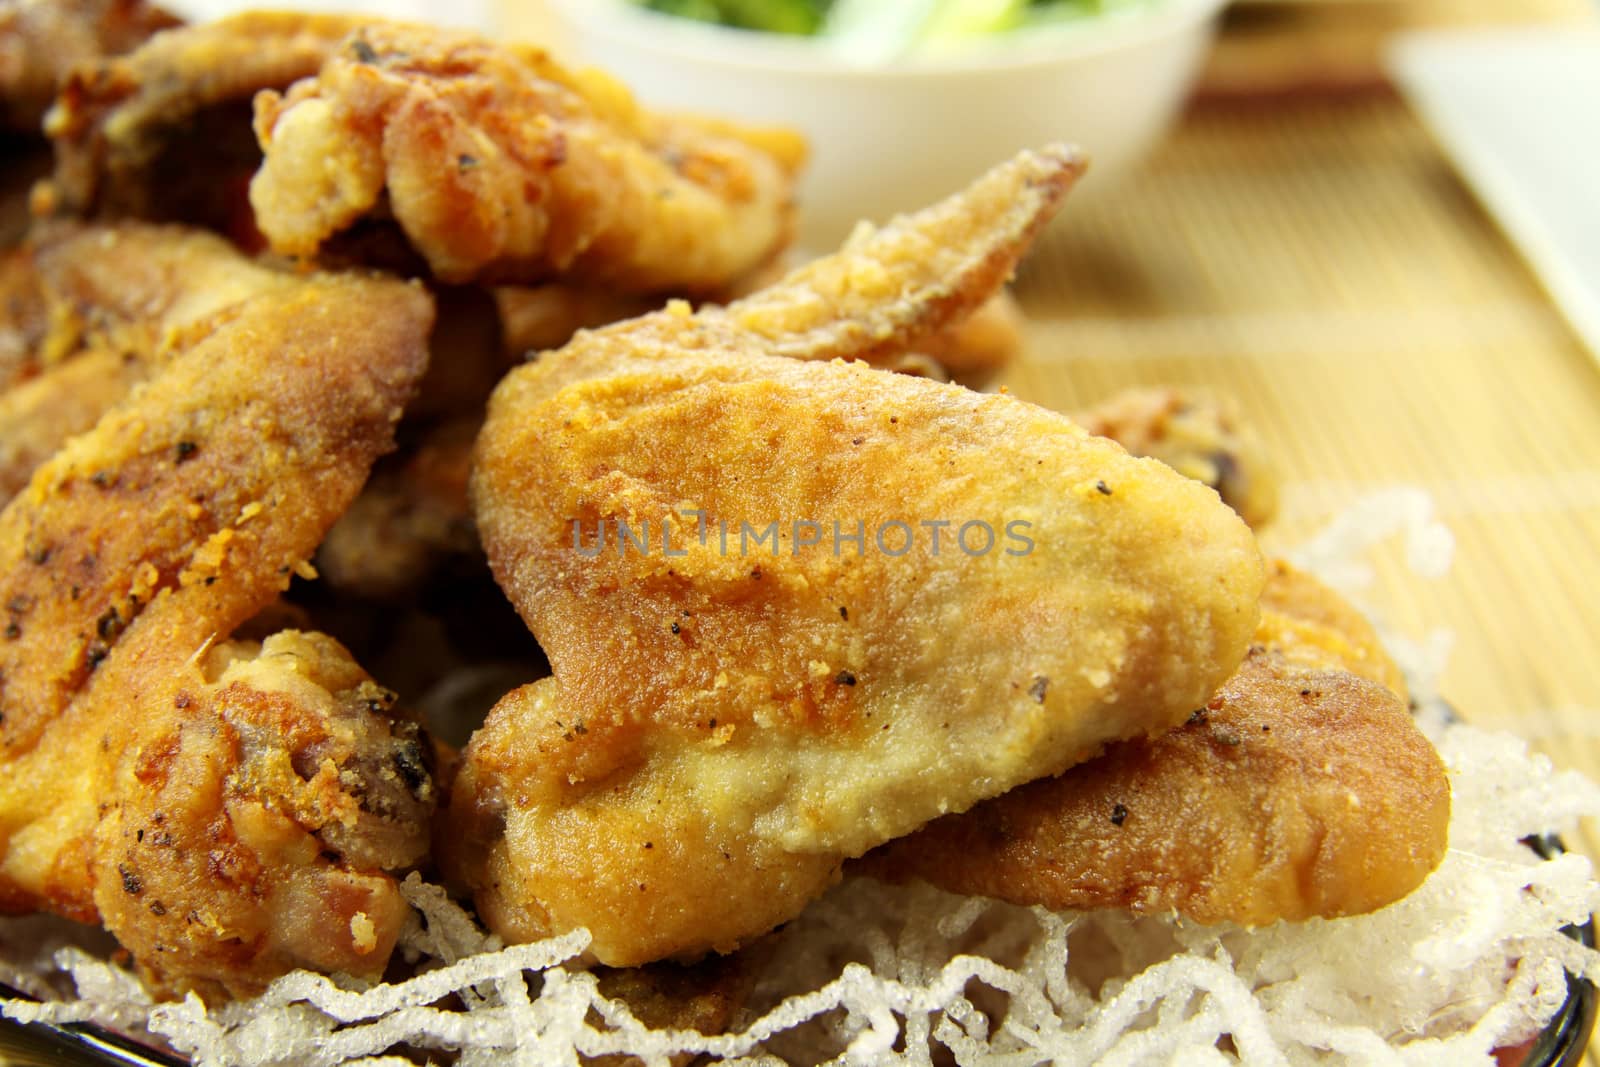 Delicious crumbed chicken wing ready to serve.